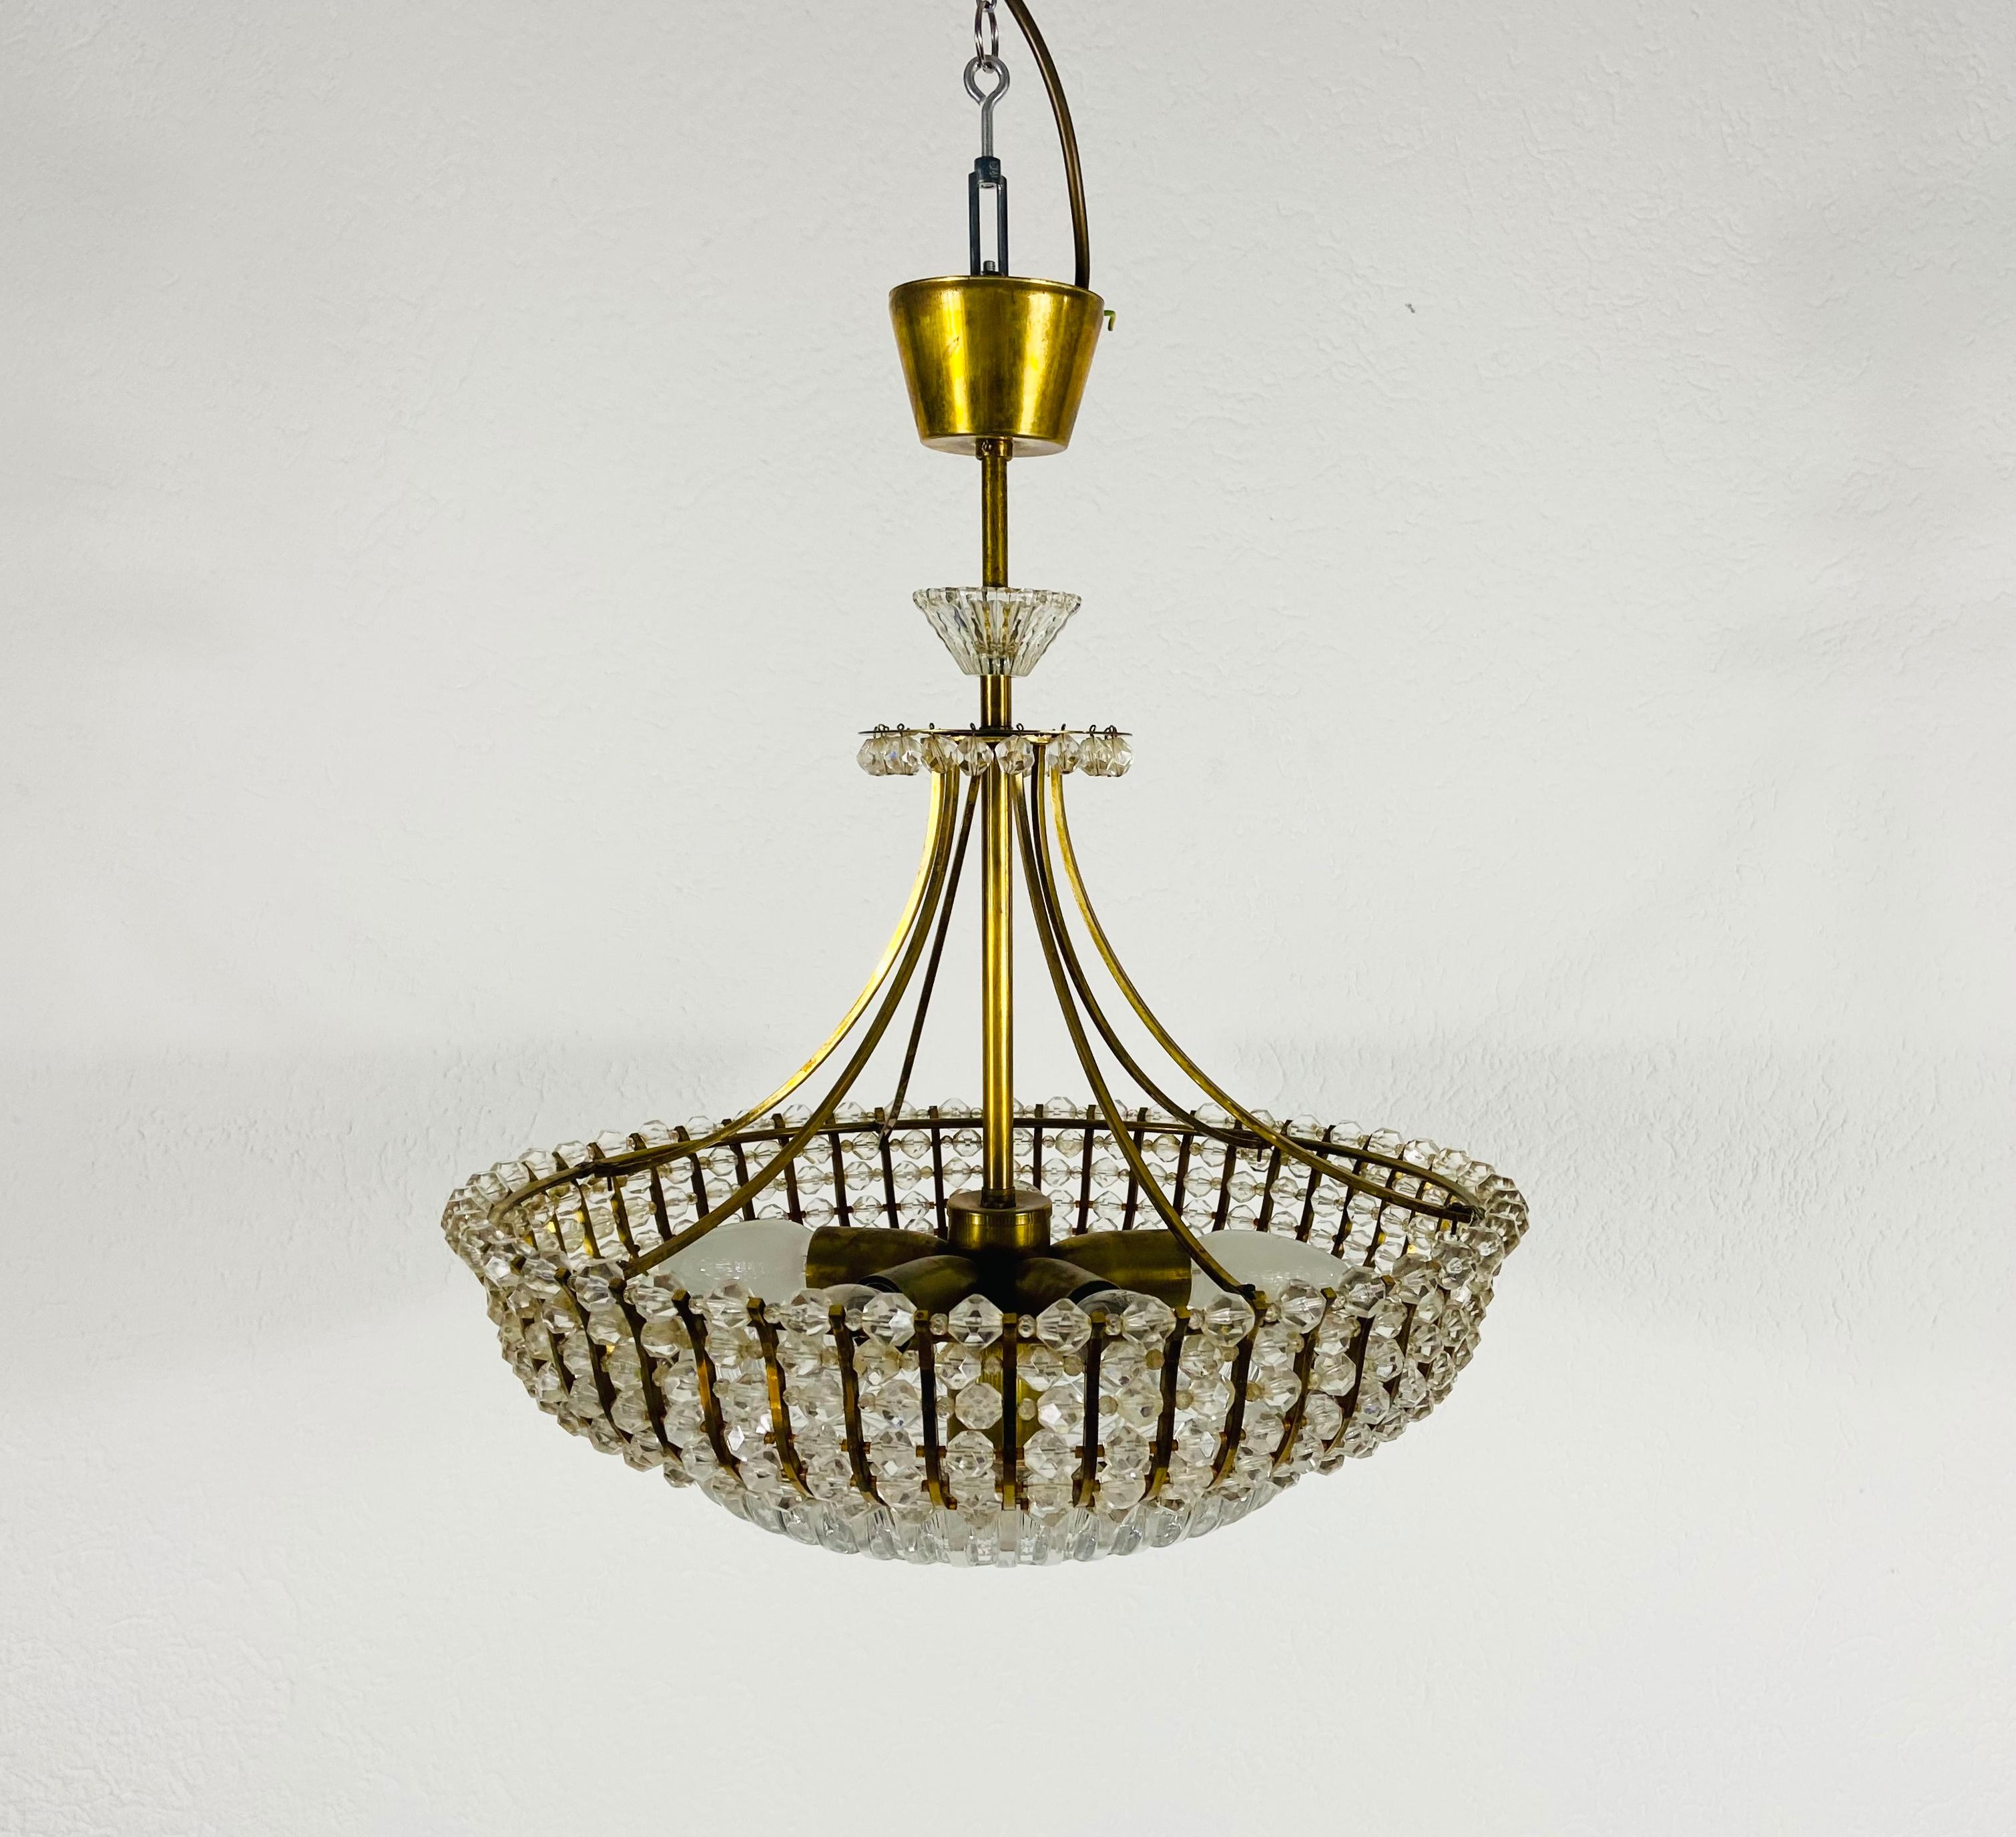 A brass chandelier made by Rupert Nikoll, Austria in the 1960s. The lighting has an amazing midcentury design. It is made of brass and small glasses and fits perfectly into a living room. The fixture has a very nice Hollywood Regency floral